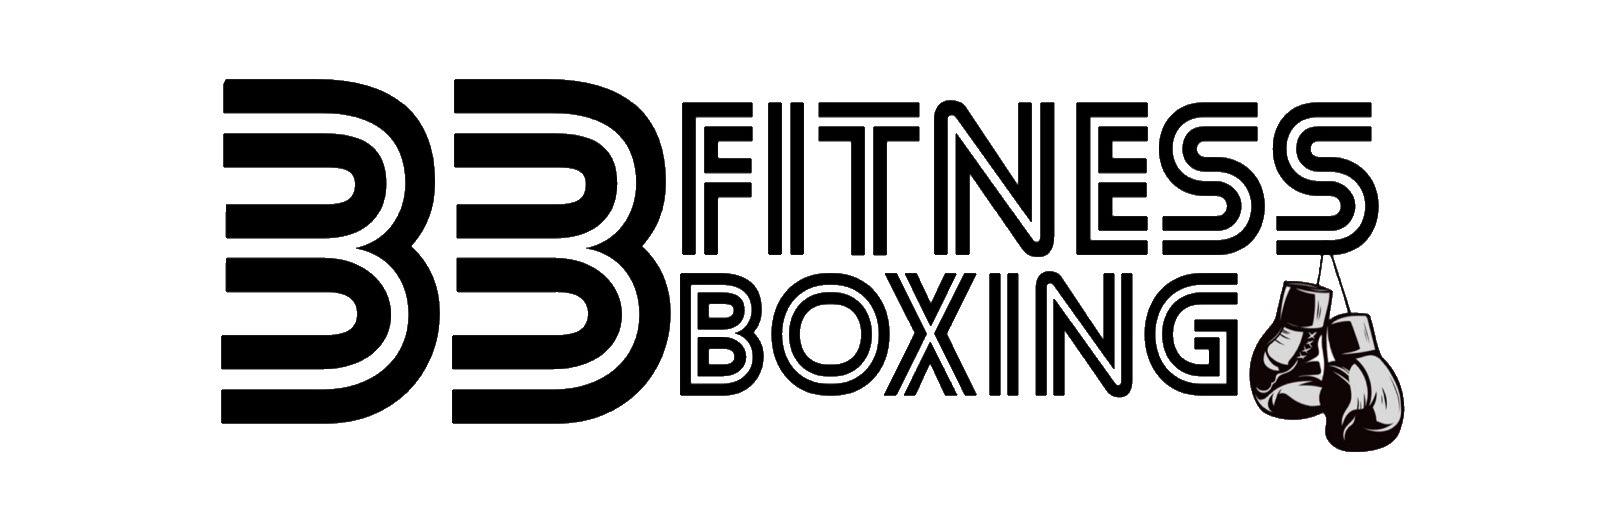 33FITNESS BOXING